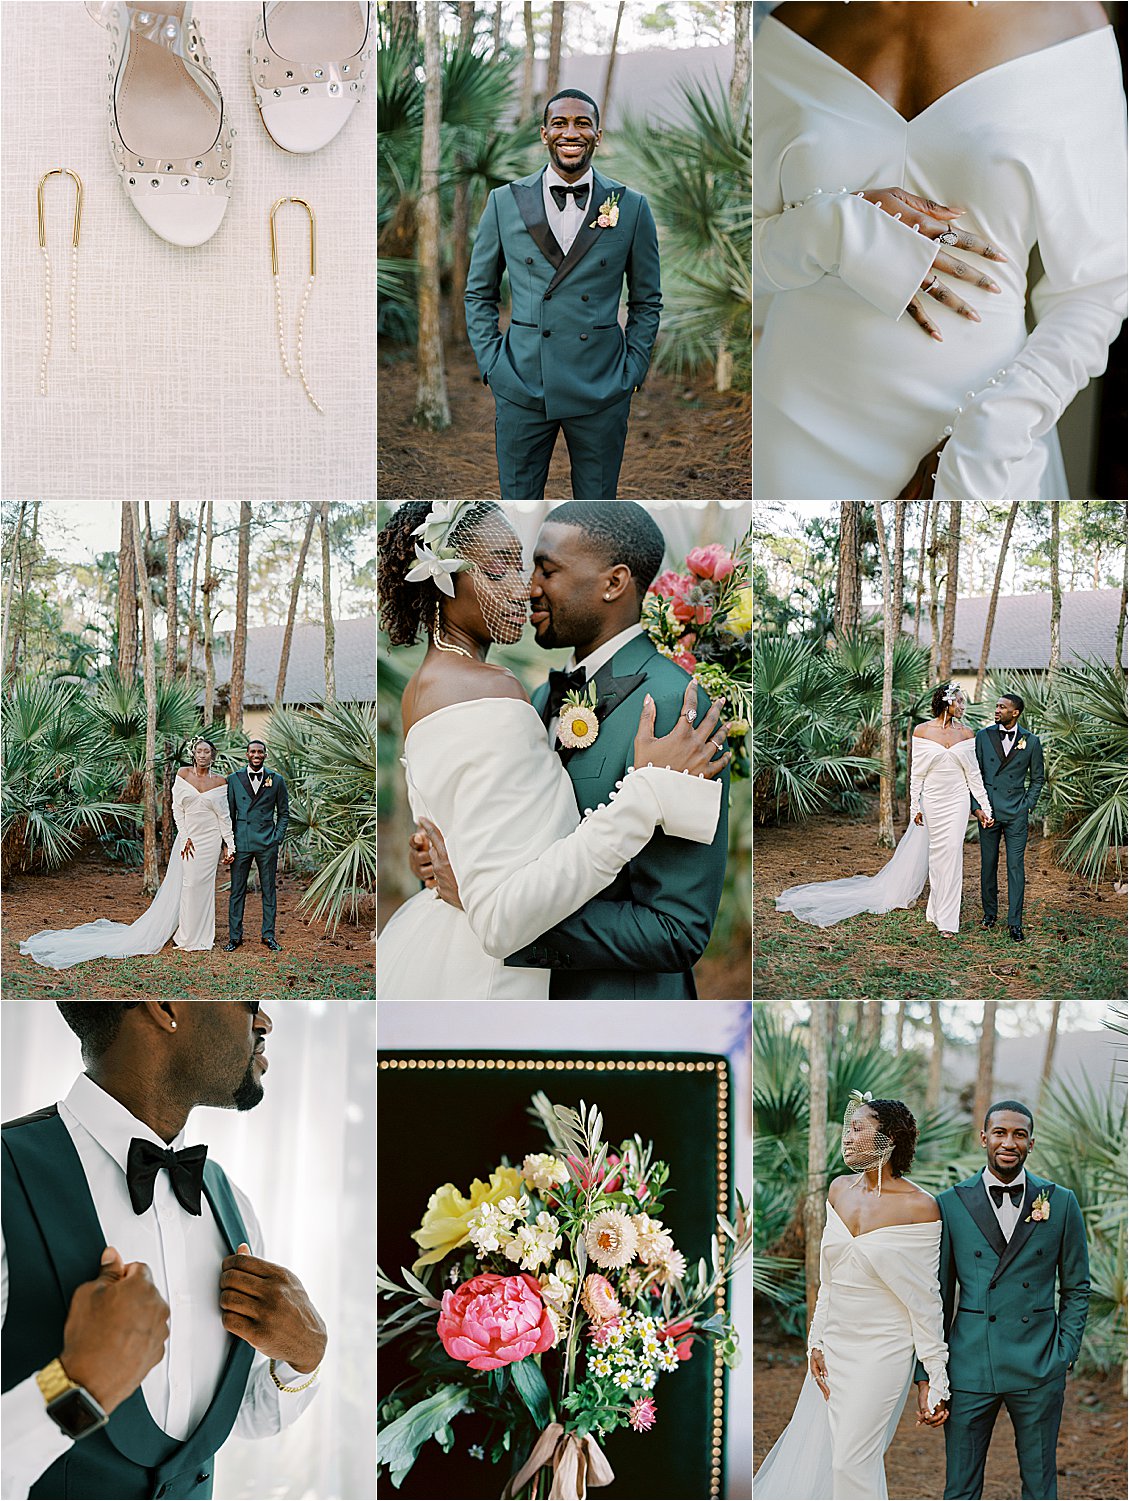 Palm Beach Intimate wedding preview with Palm Beach Film Wedding Photographer, Renee Hollingshead at Social House in Lake Worth